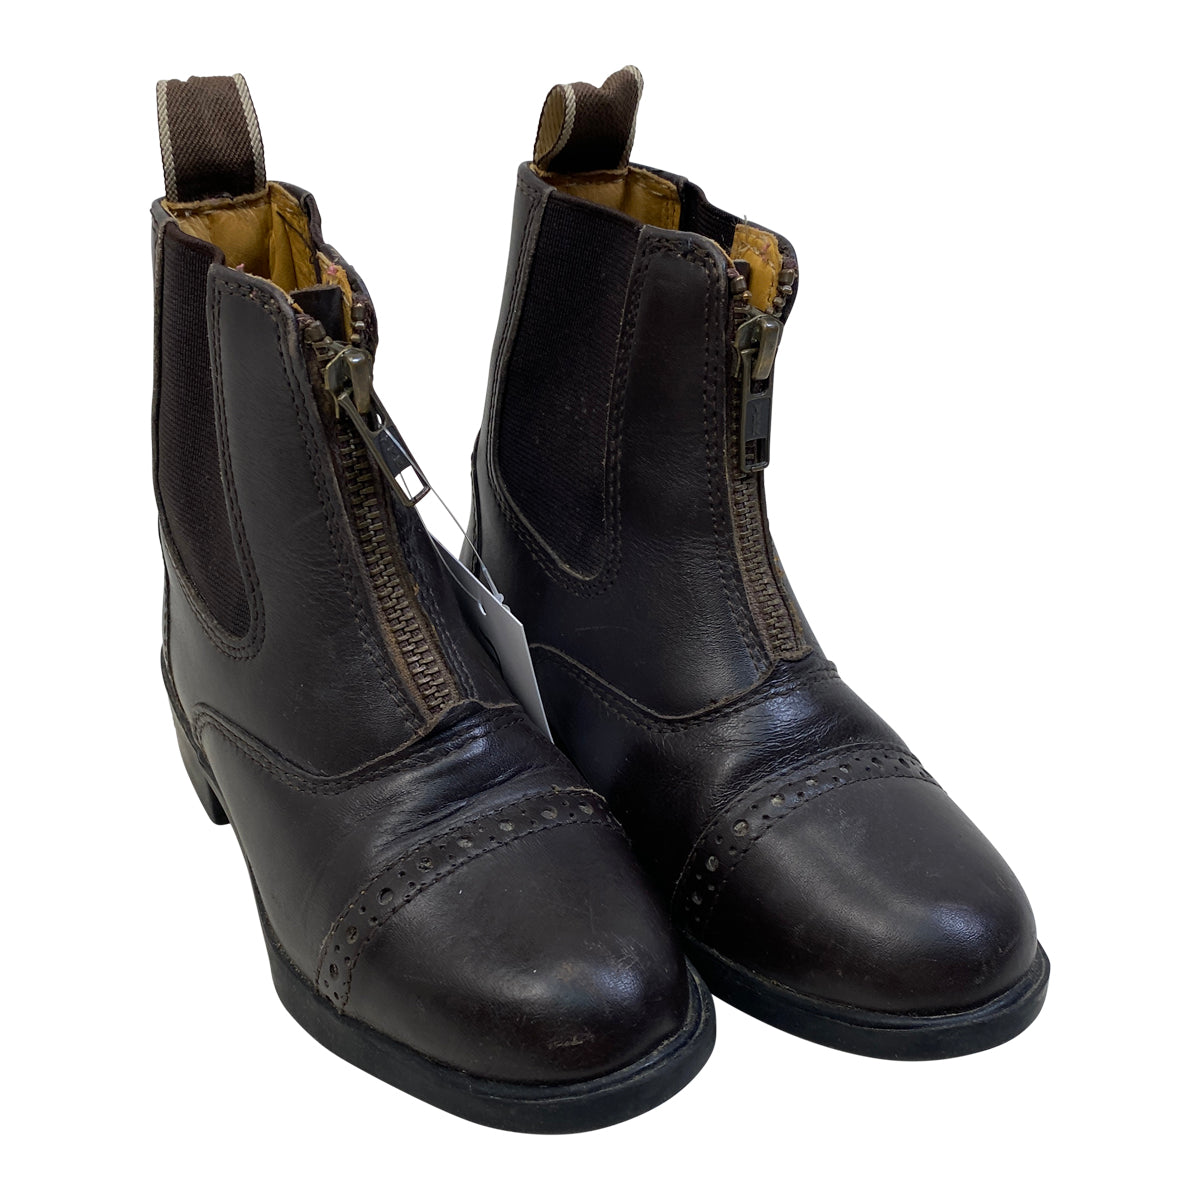 Ovation Sport Rider II Paddock Boots in Brown